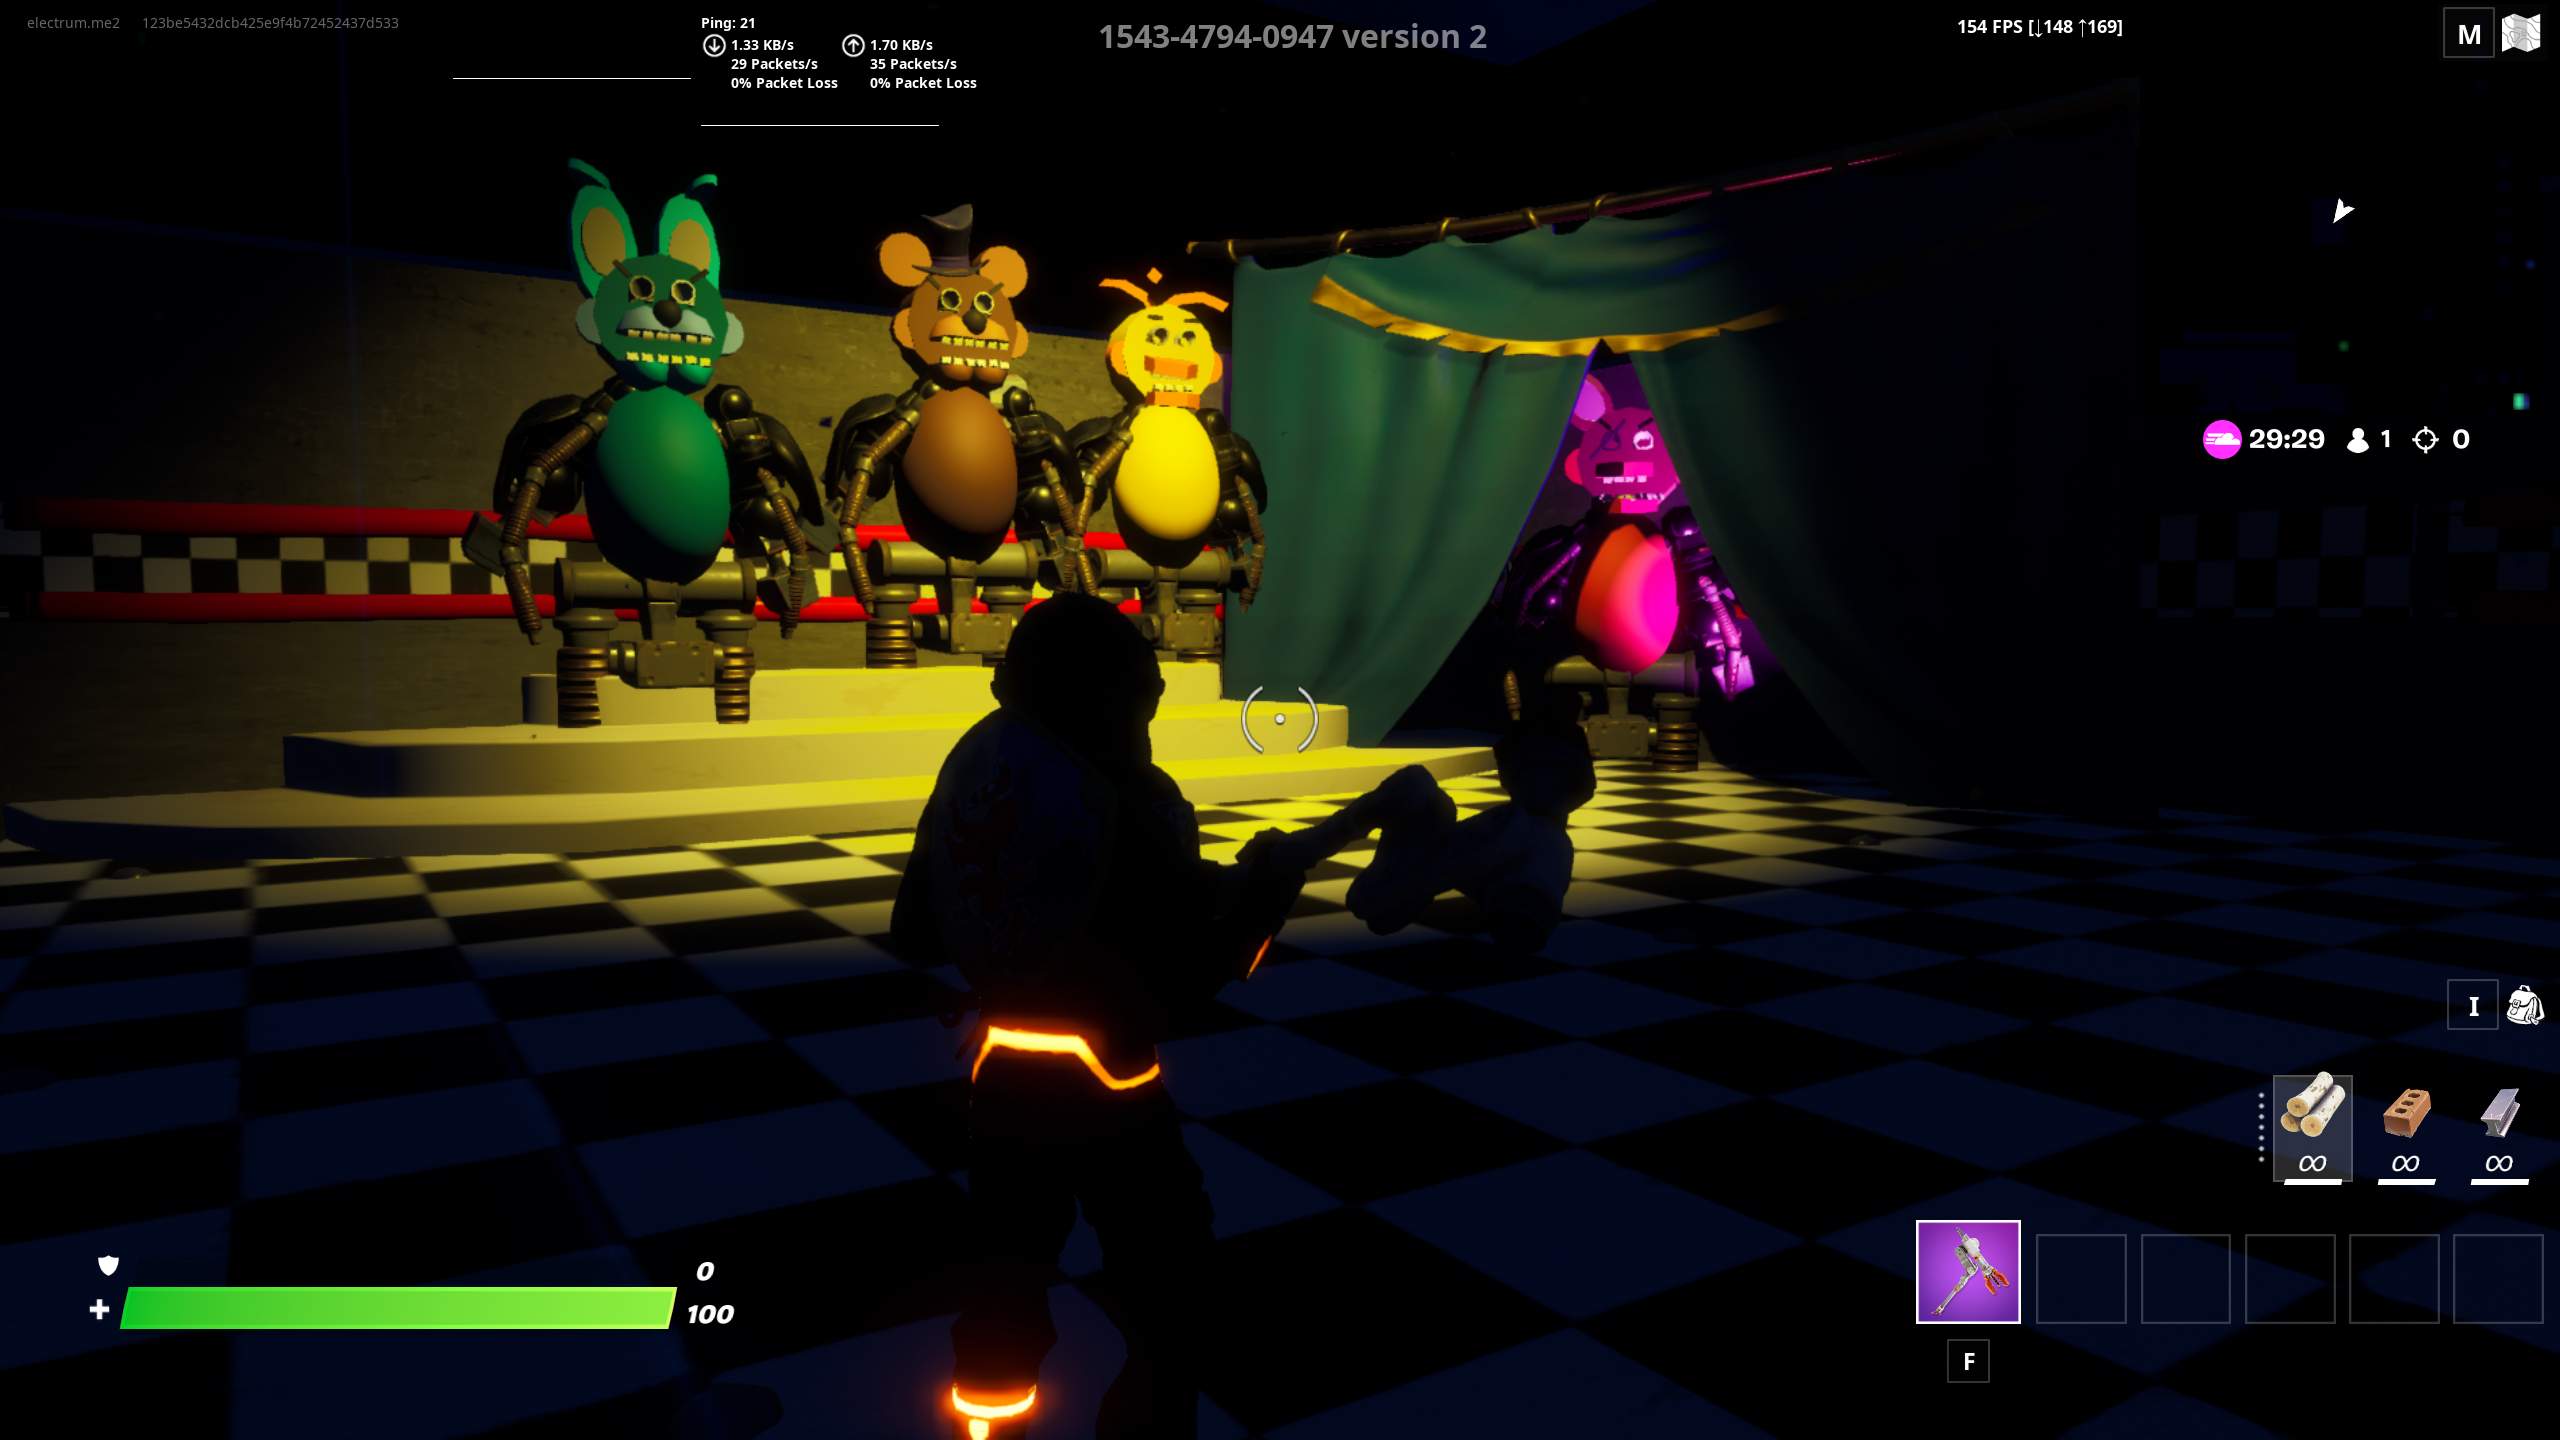 Check out my Fortnite Creative Horror Map (Security Attraction) A Similar  experience to Five Nights At Freddy's with different mechanics and  gameplay! This creative map was created inside of 1.0 not UEFN!!